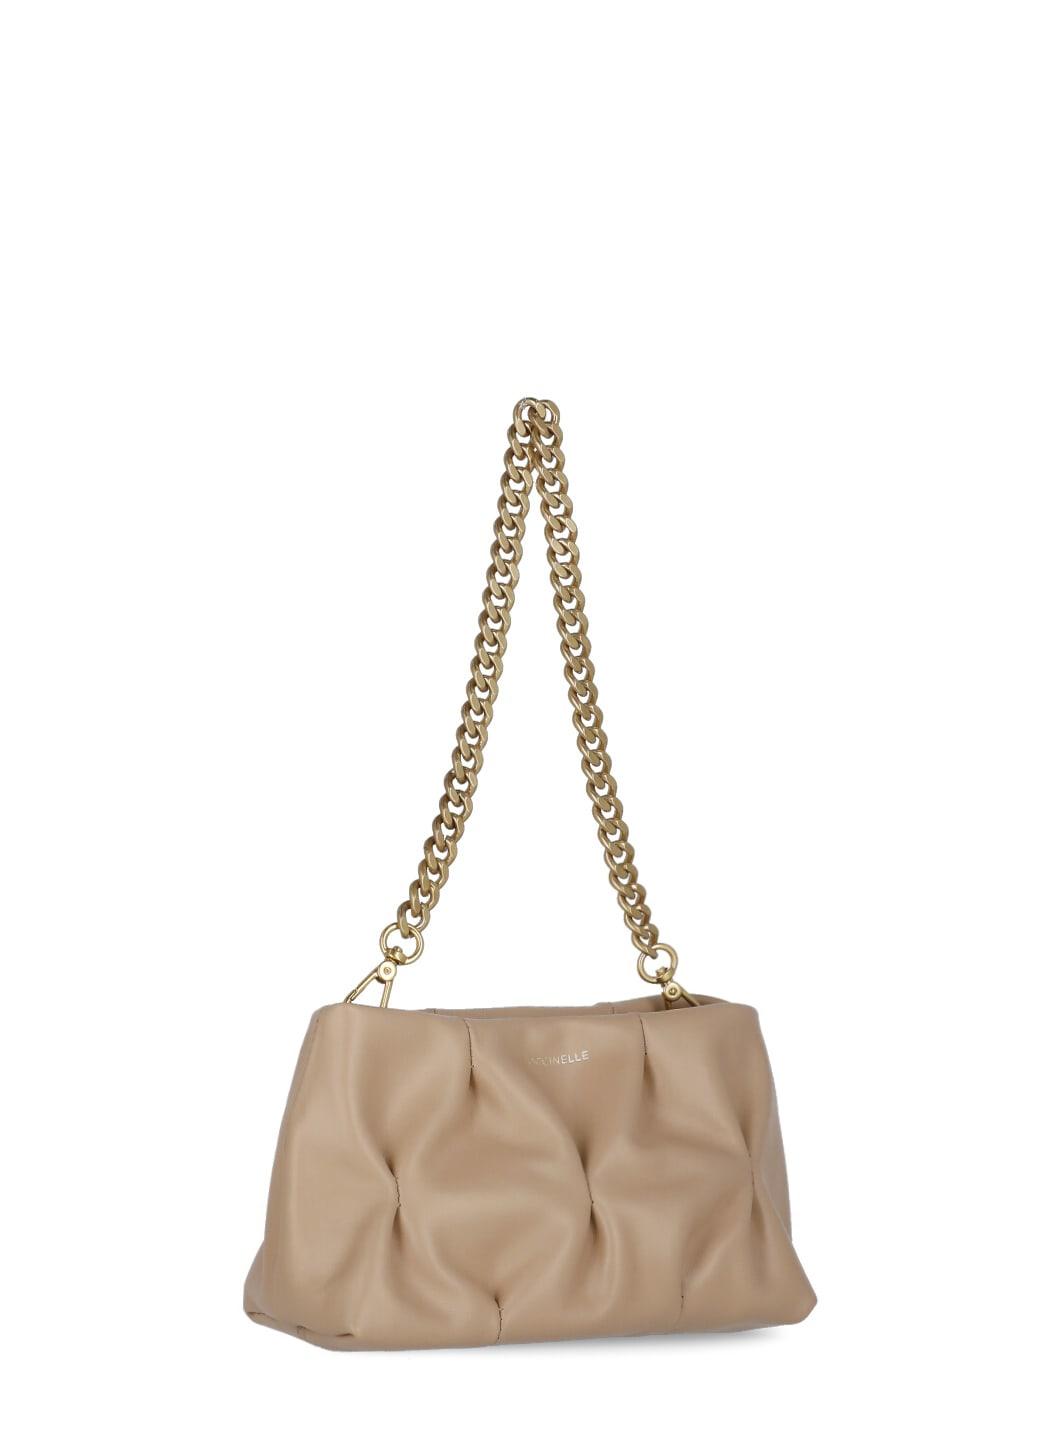 Coccinelle Ophelie Goodie Mini Shoulder Bag in Natural | Lyst